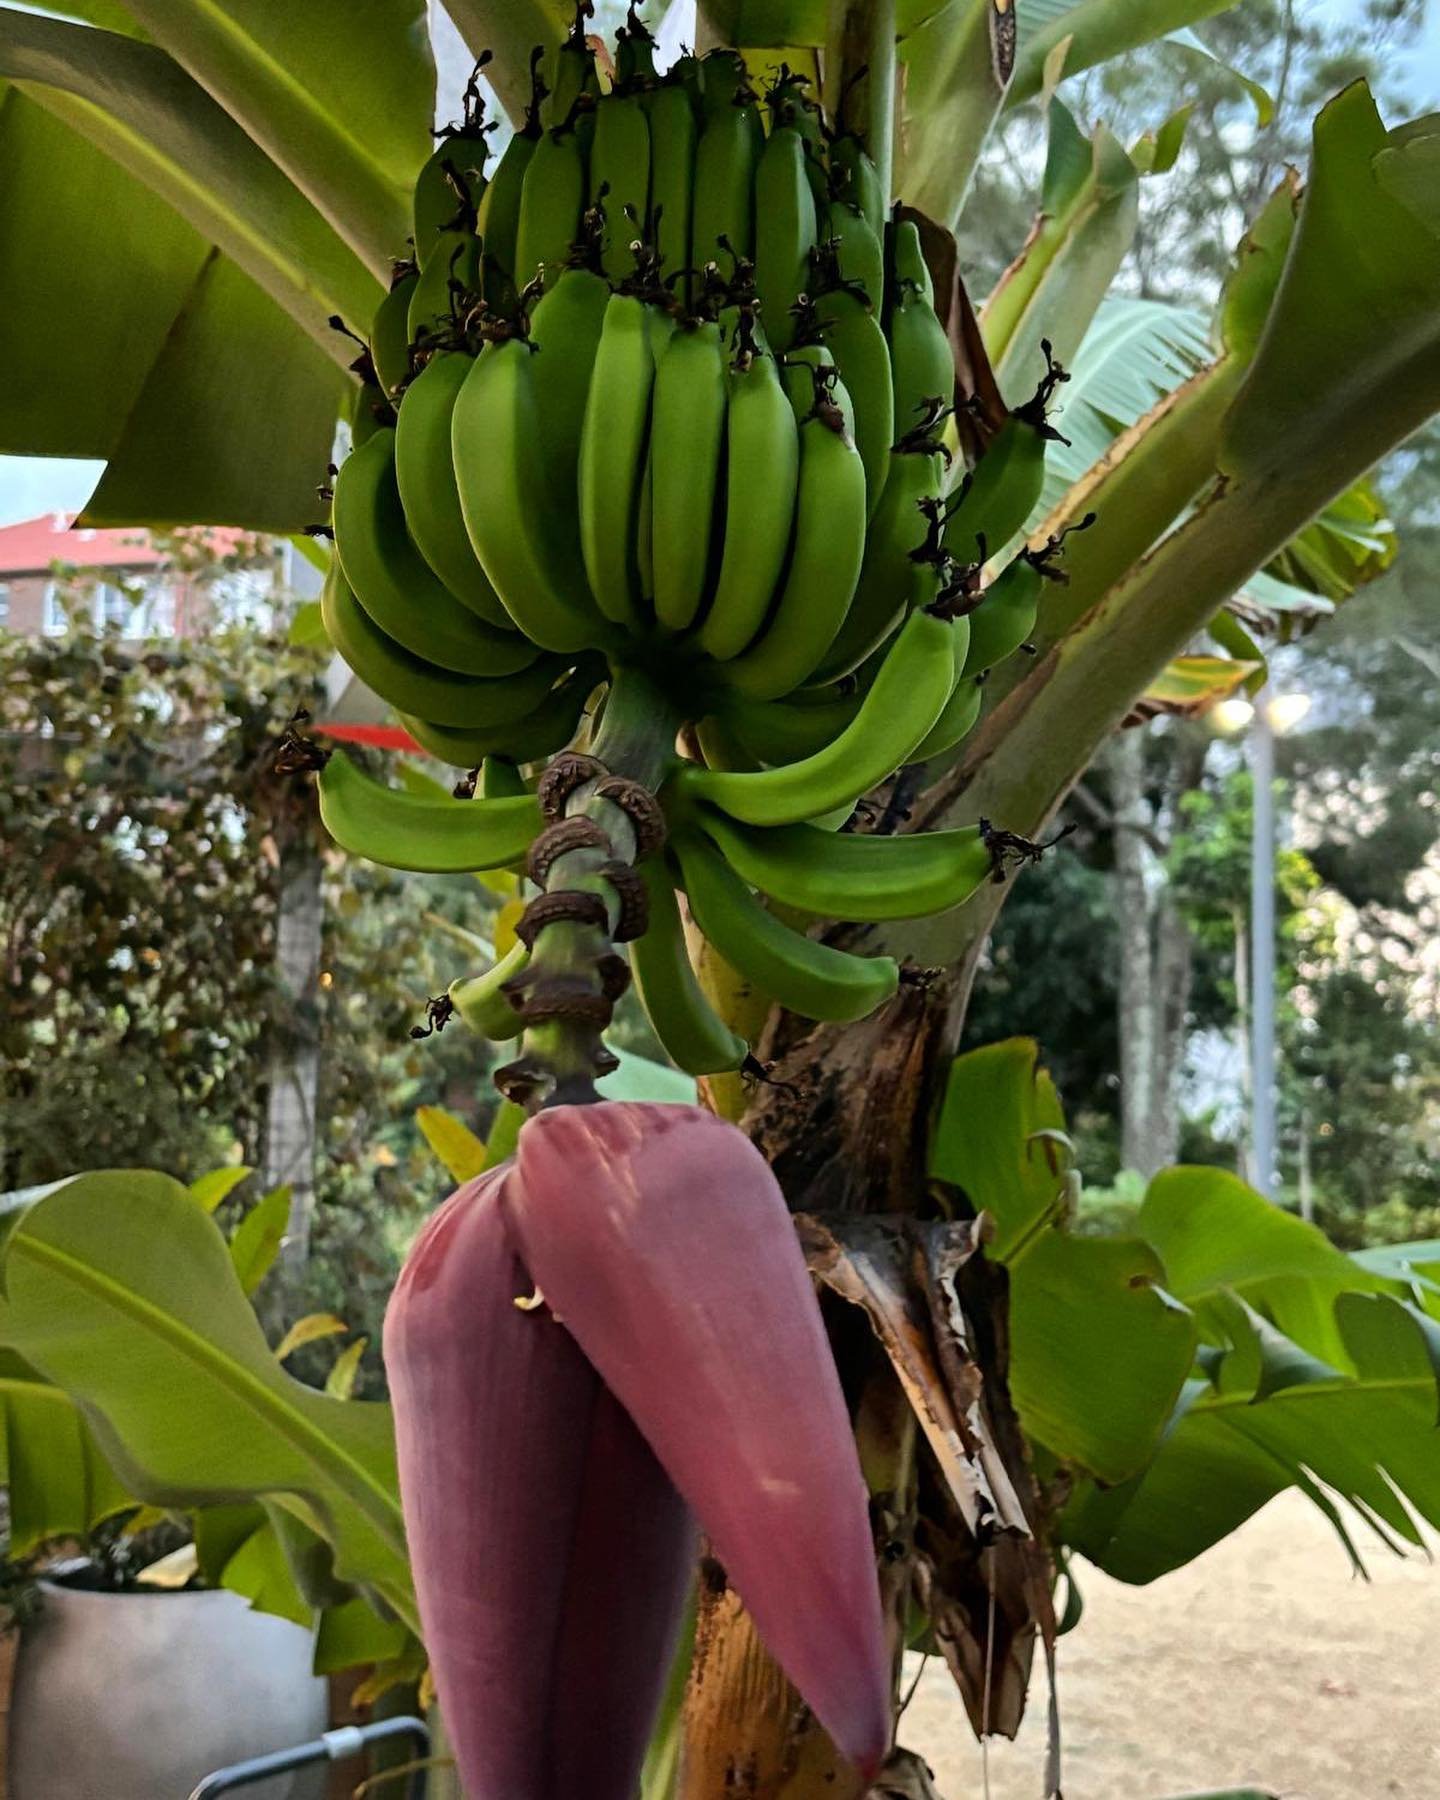 Banana hands in the Kitchen Garden.
Look at that beautiful flower spike.  It emerges at the top of the trunk &amp; produces yellow flowers inside it, and as it grows &amp; bends down the trunk, the flowers grow into fingers or banana. The flower itse